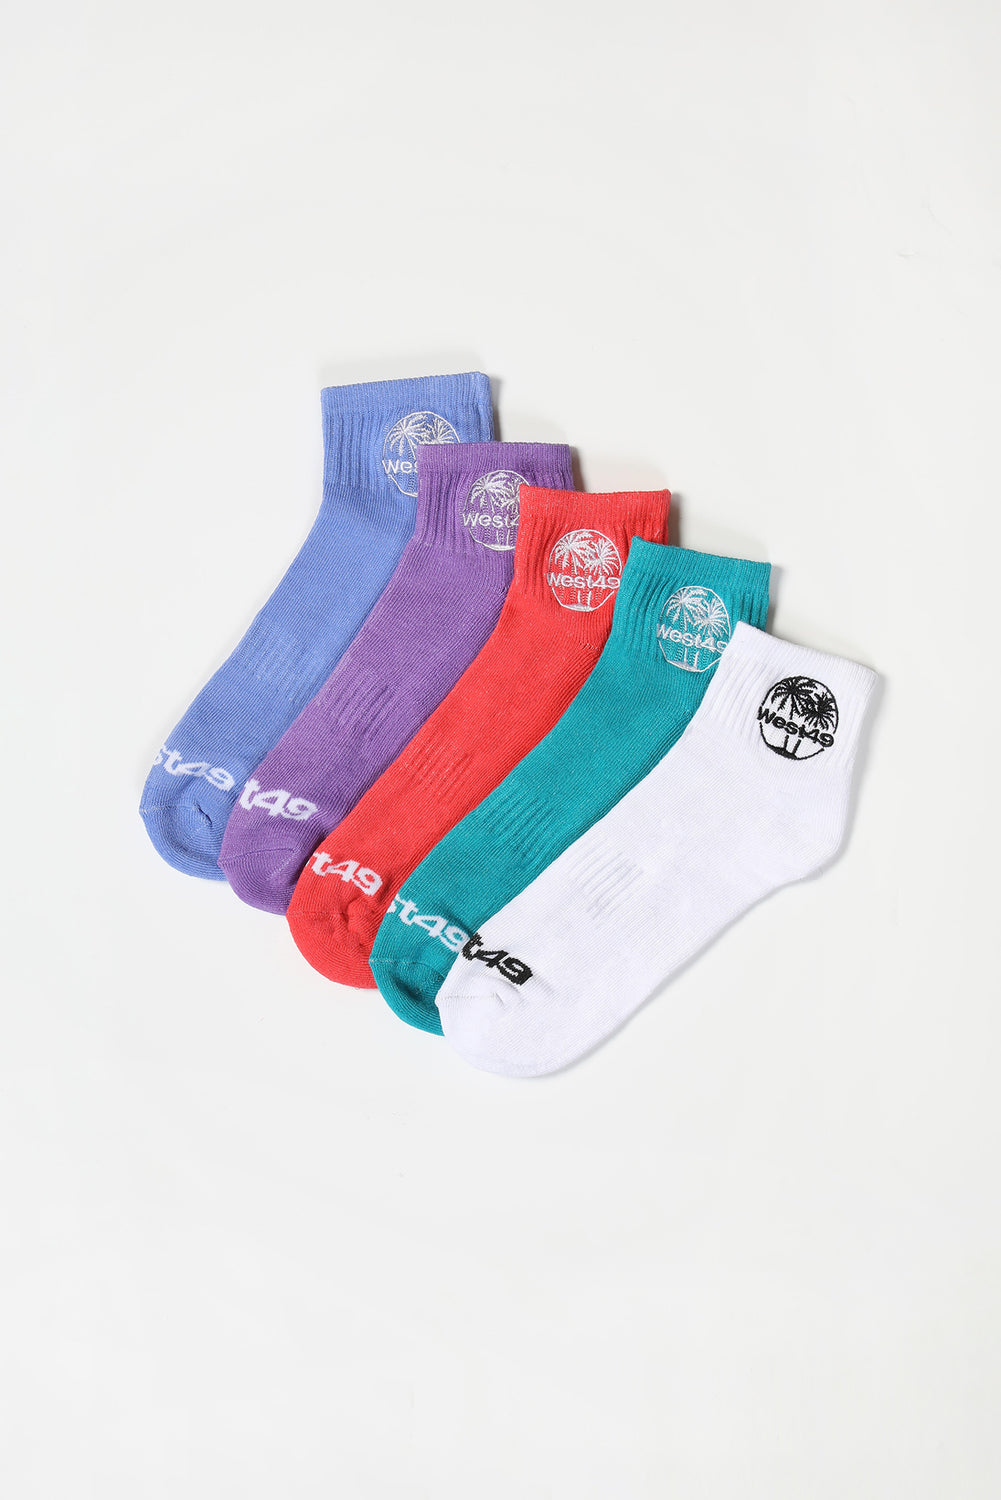 West49 Youth 5-Pack Tropical Logo Ankle Socks West49 Youth 5-Pack Tropical Logo Ankle Socks